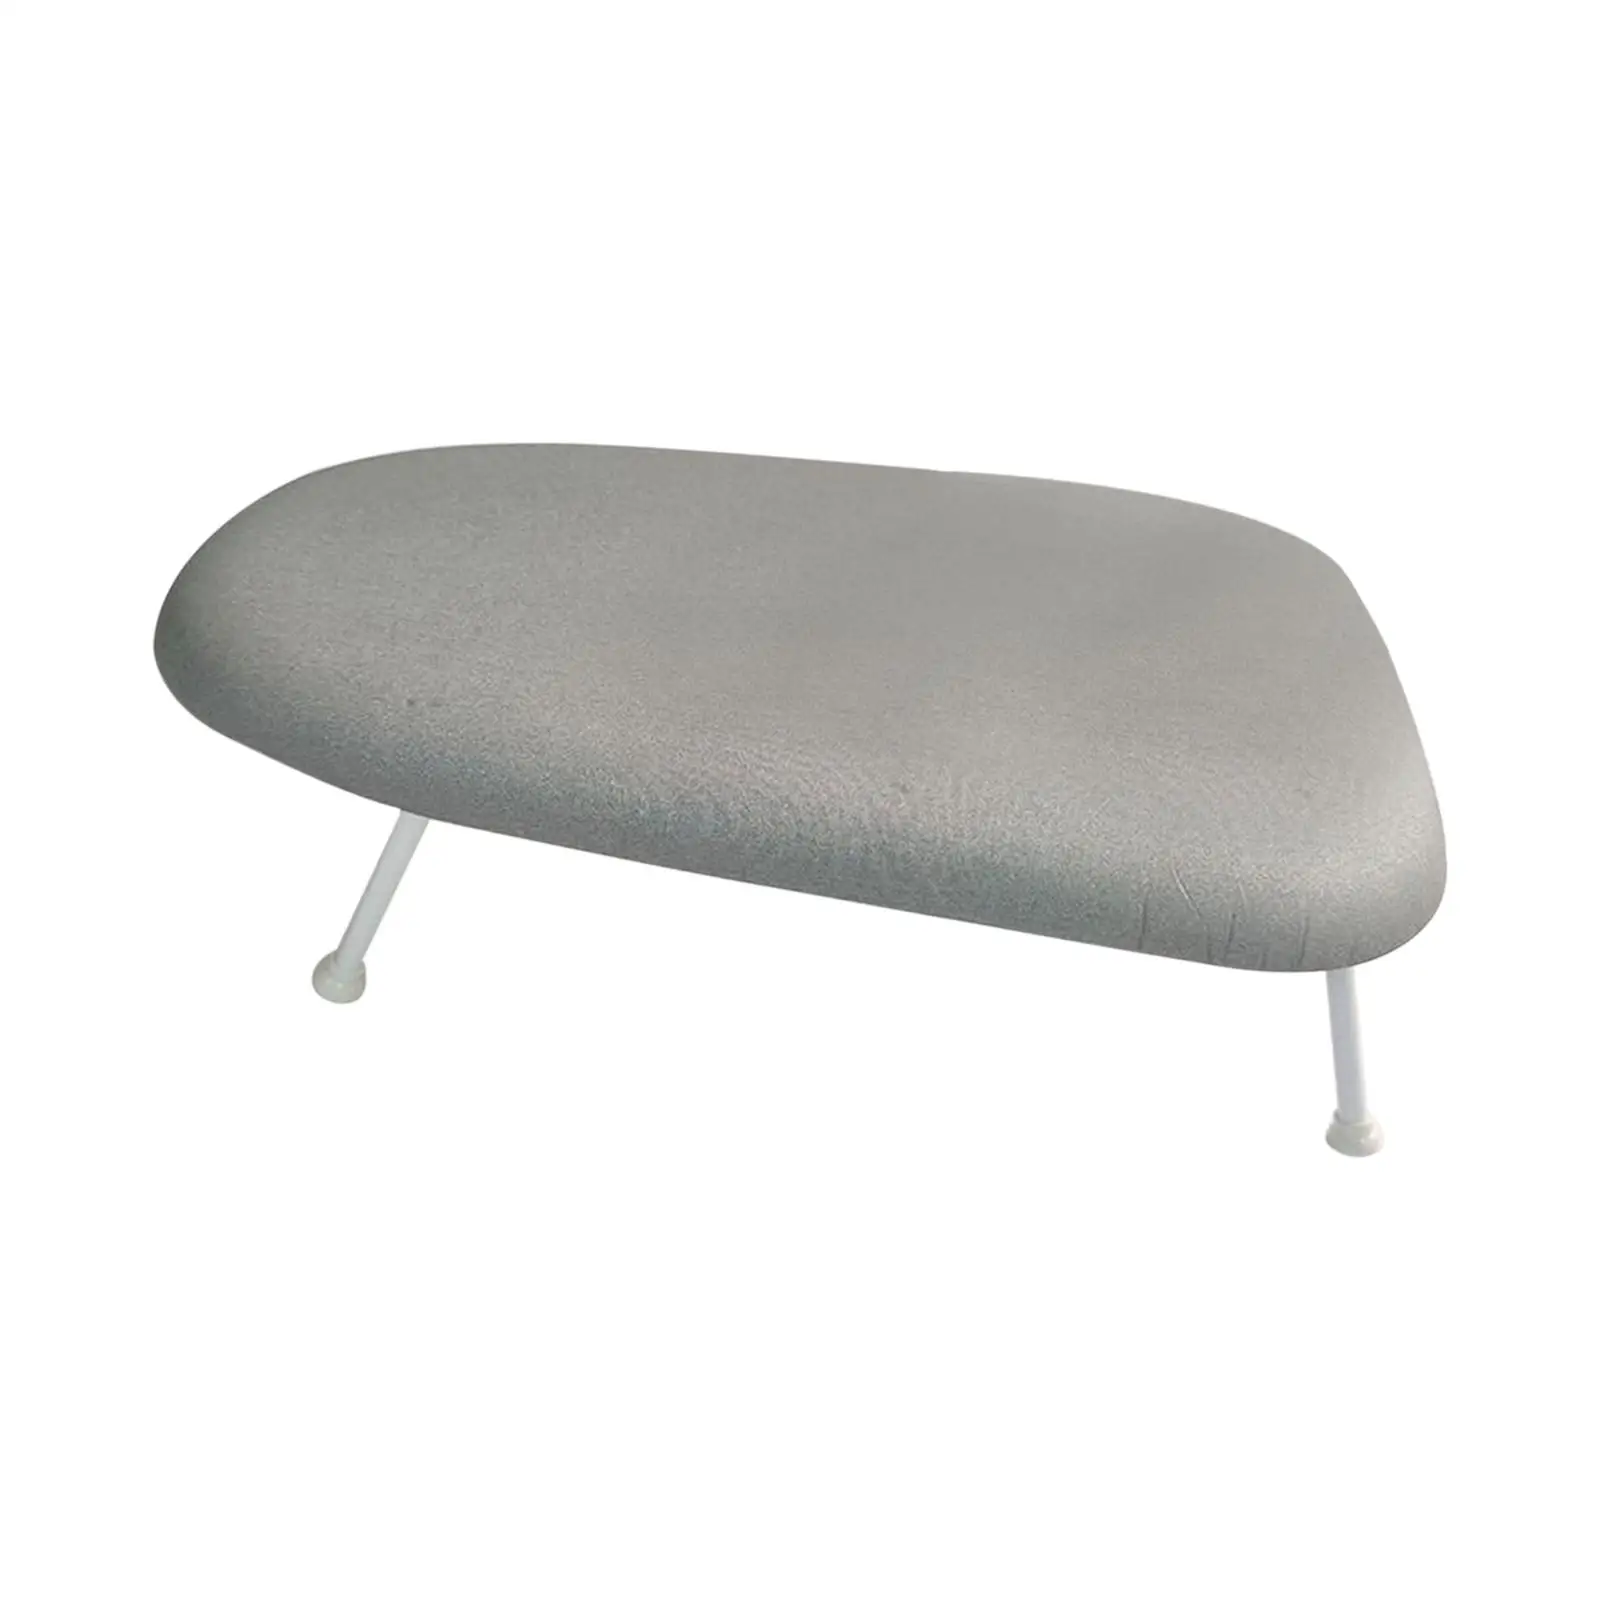 Tabletop Ironing Board Ironing Cover Laptop Table for Home Ironing Clothes